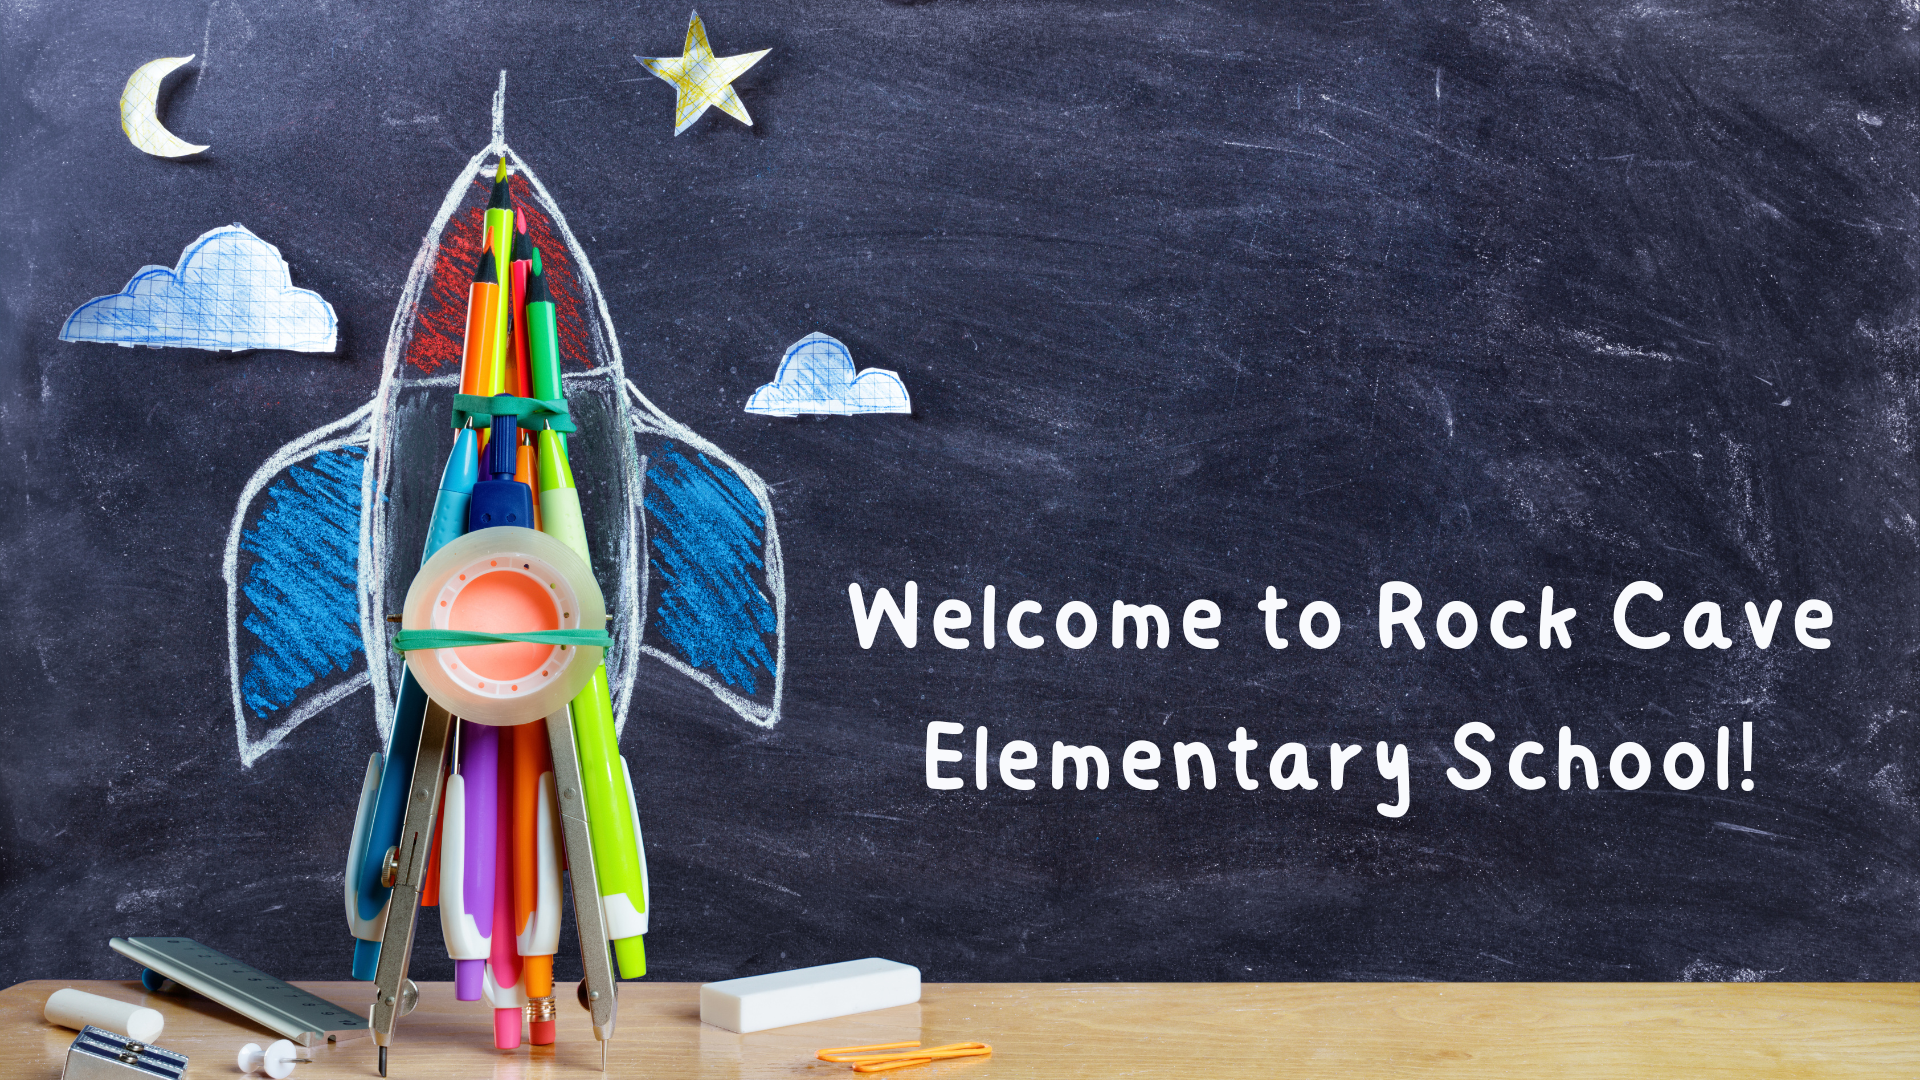 Welcome to Rock Cave Elementary School!